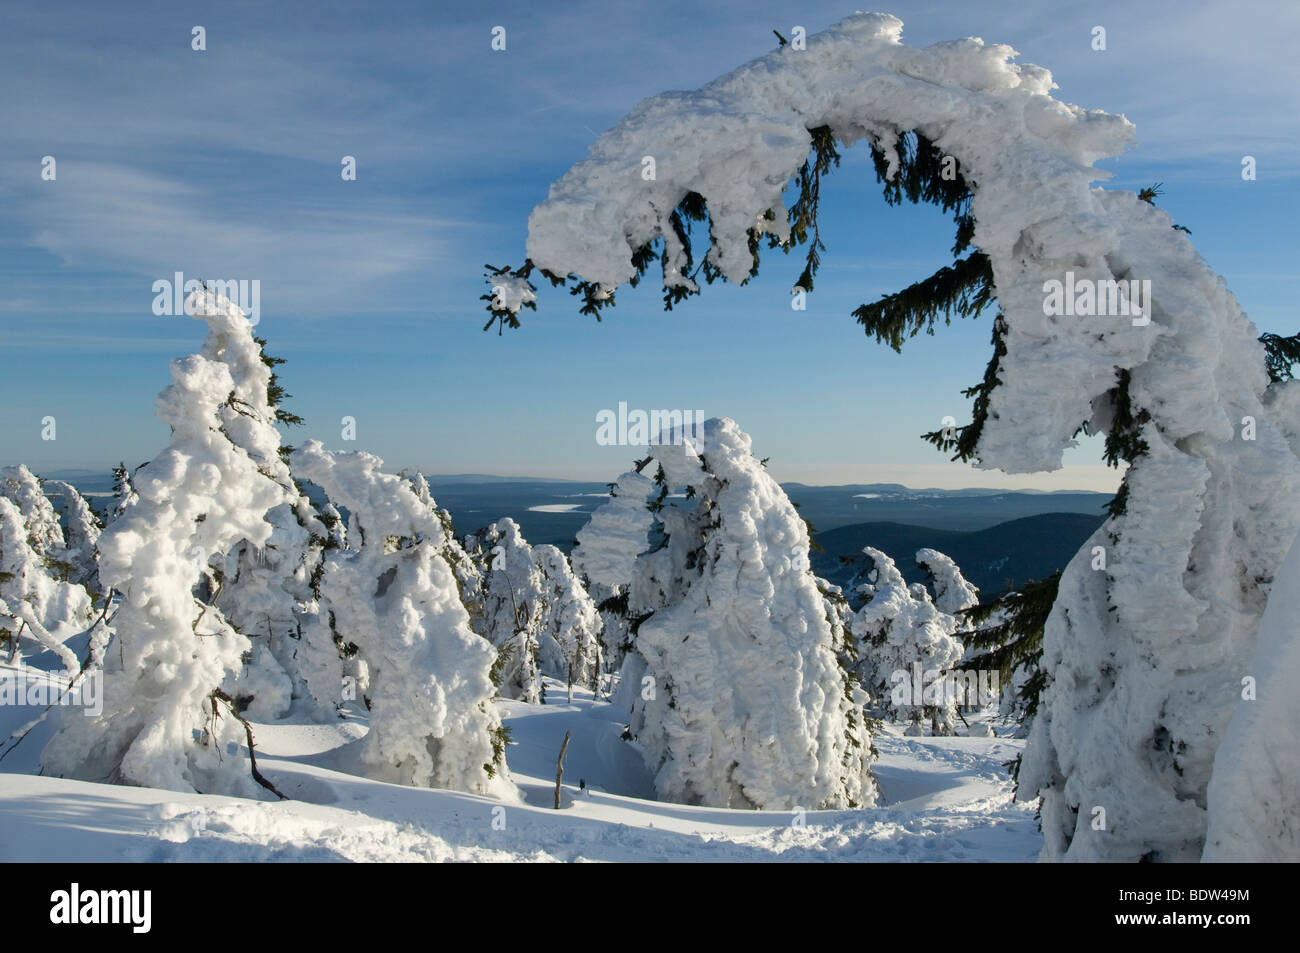 Snow-covered trees on the Brocken in the Harz Mountains, Germany Stock Photo